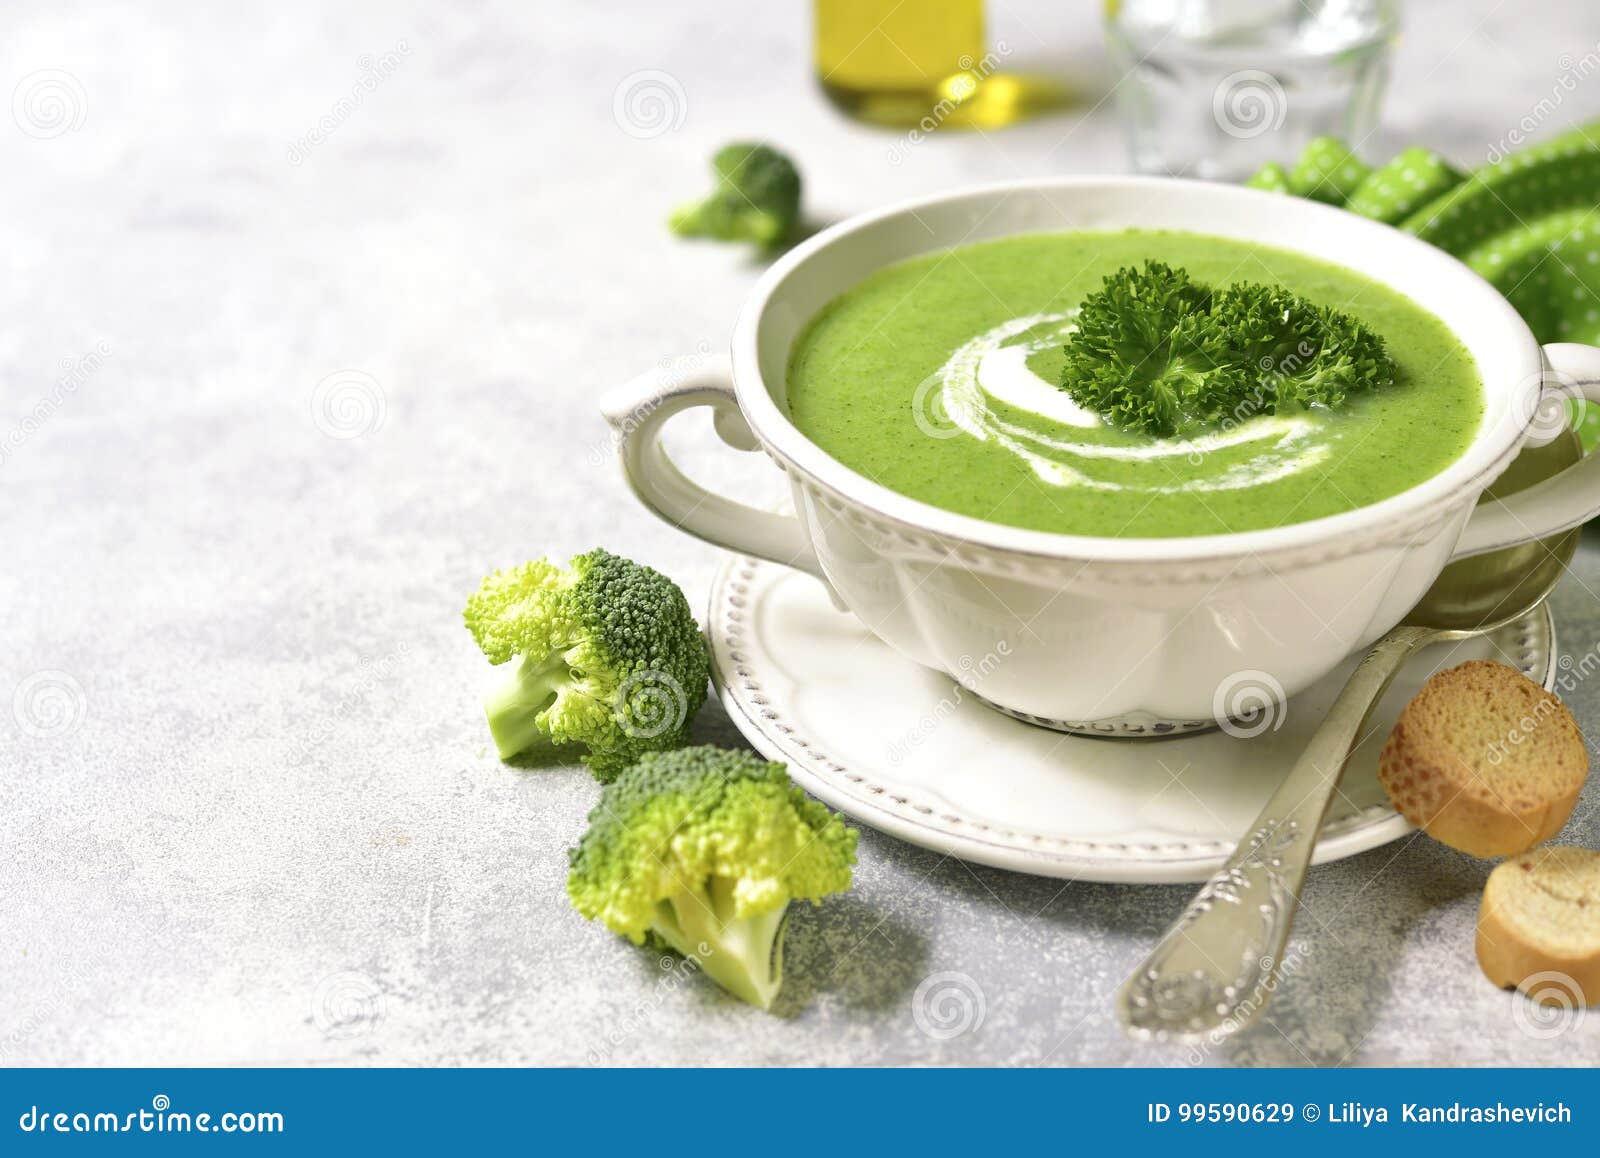 Broccoli Soup in a White Bowl. Stock Image - Image of delicious, food ...